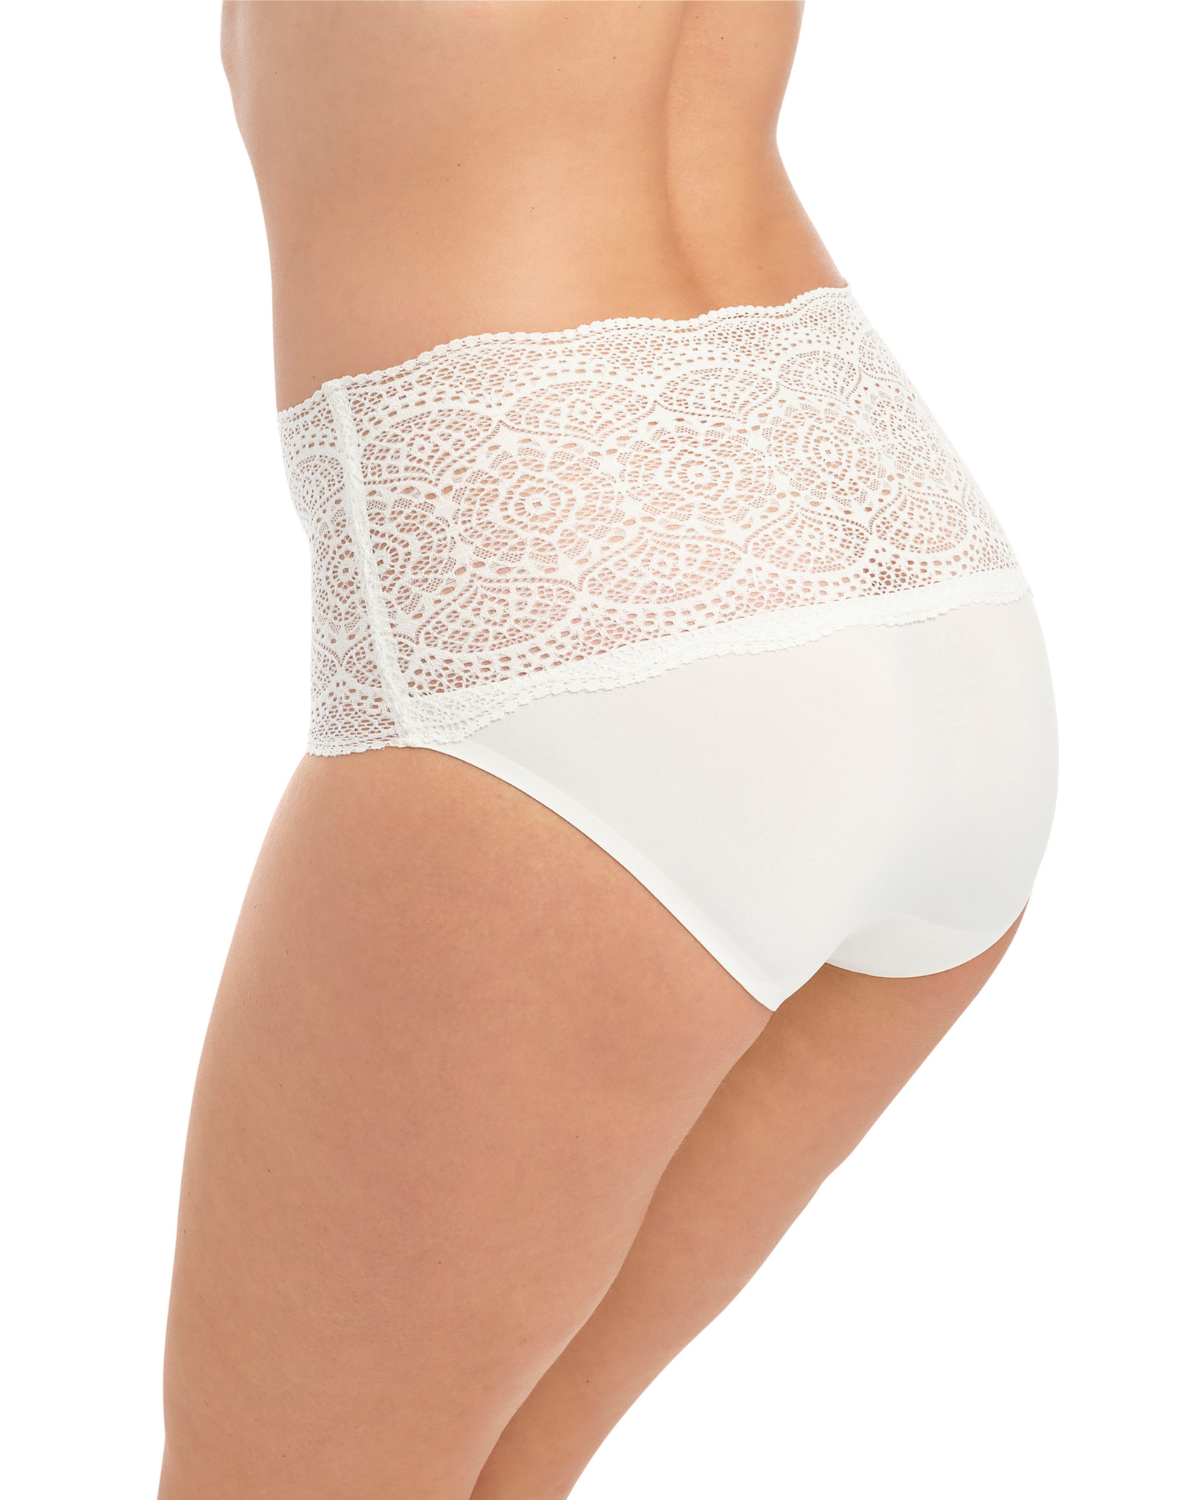 Model wearing a wide lace band brief panty in white